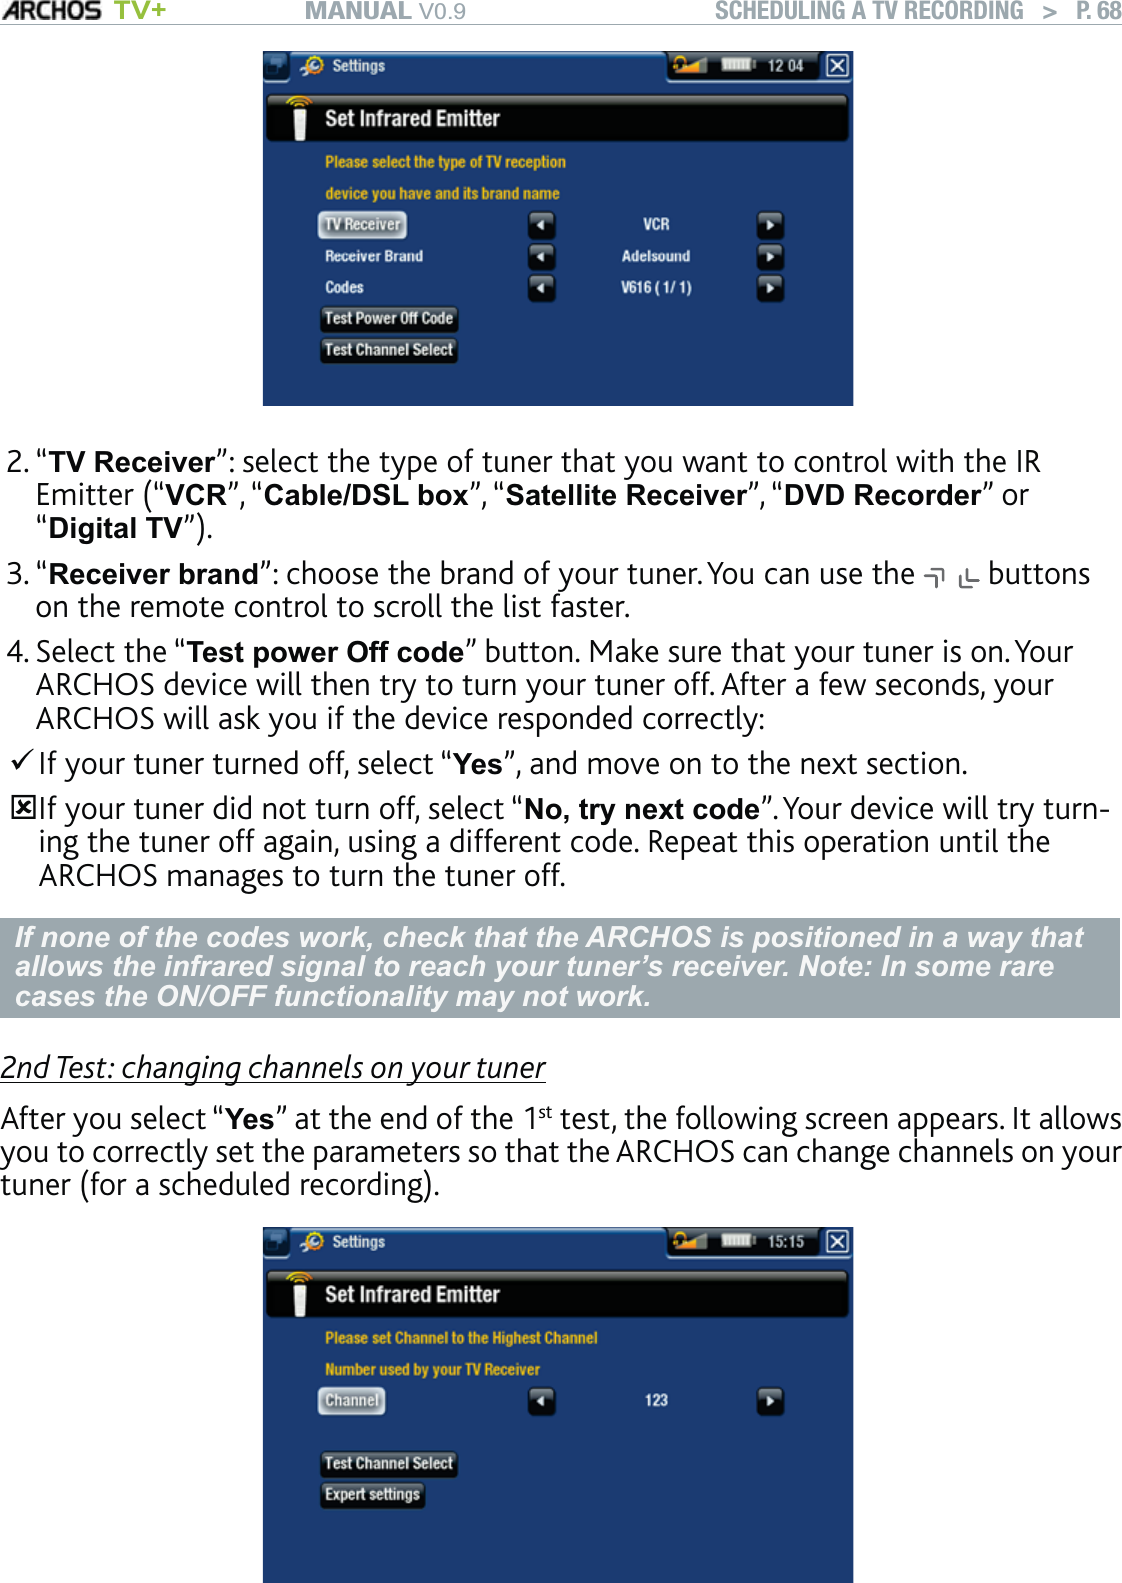 MANUAL V0.9 TV+ SCHEDULING A TV RECORDING   &gt;   P. 68“TV Receiver”: select the type of tuner that you want to control with the IR Emitter (“VCR”, “Cable/DSL box”, “Satellite Receiver”, “DVD Recorder” or “Digital TV”).“Receiver brand”: choose the brand of your tuner. You can use the   buttons on the remote control to scroll the list faster.Select the “Test power Off code” button. Make sure that your tuner is on. Your ARCHOS device will then try to turn your tuner off. After a few seconds, your ARCHOS will ask you if the device responded correctly:If your tuner turned off, select “Yes”, and move on to the next section. If your tuner did not turn off, select “No, try next code”. Your device will try turn-ing the tuner off again, using a different code. Repeat this operation until the ARCHOS manages to turn the tuner off.If none of the codes work, check that the ARCHOS is positioned in a way that allows the infrared signal to reach your tuner’s receiver. Note: In some rare cases the ON/OFF functionality may not work.2nd Test: changing channels on your tunerAfter you select “Yes” at the end of the 1st test, the following screen appears. It allows you to correctly set the parameters so that the ARCHOS can change channels on your tuner (for a scheduled recording).2.3.4.